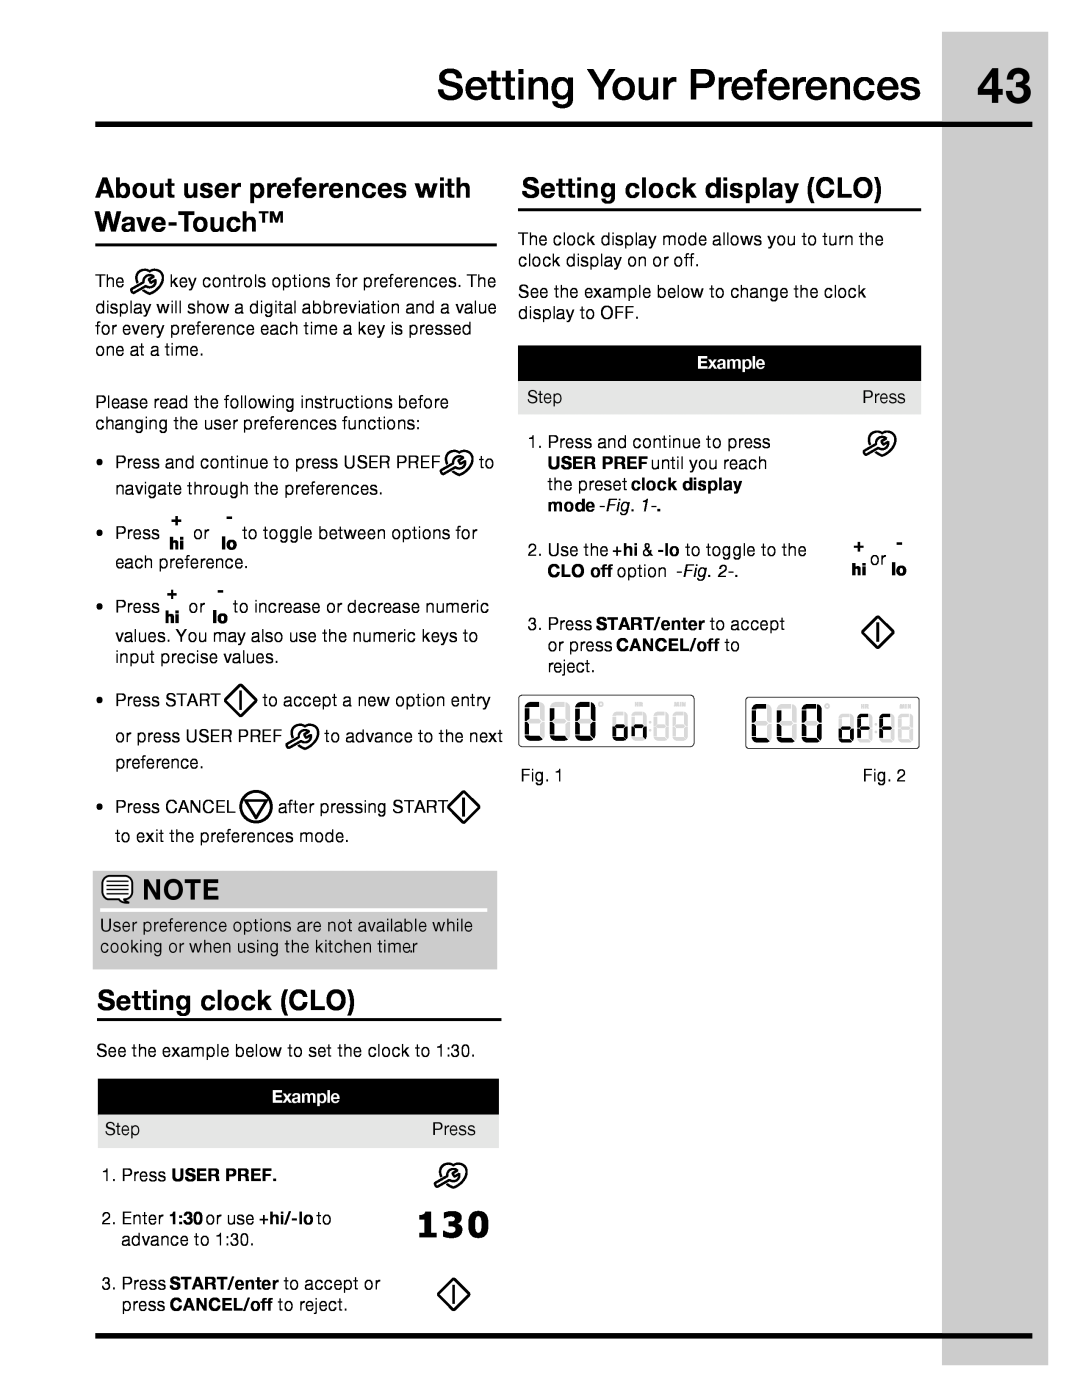 Electrolux 316471110 Setting Your Preferences, About user preferences with Wave-Touch, Setting clock display CLO, Example 